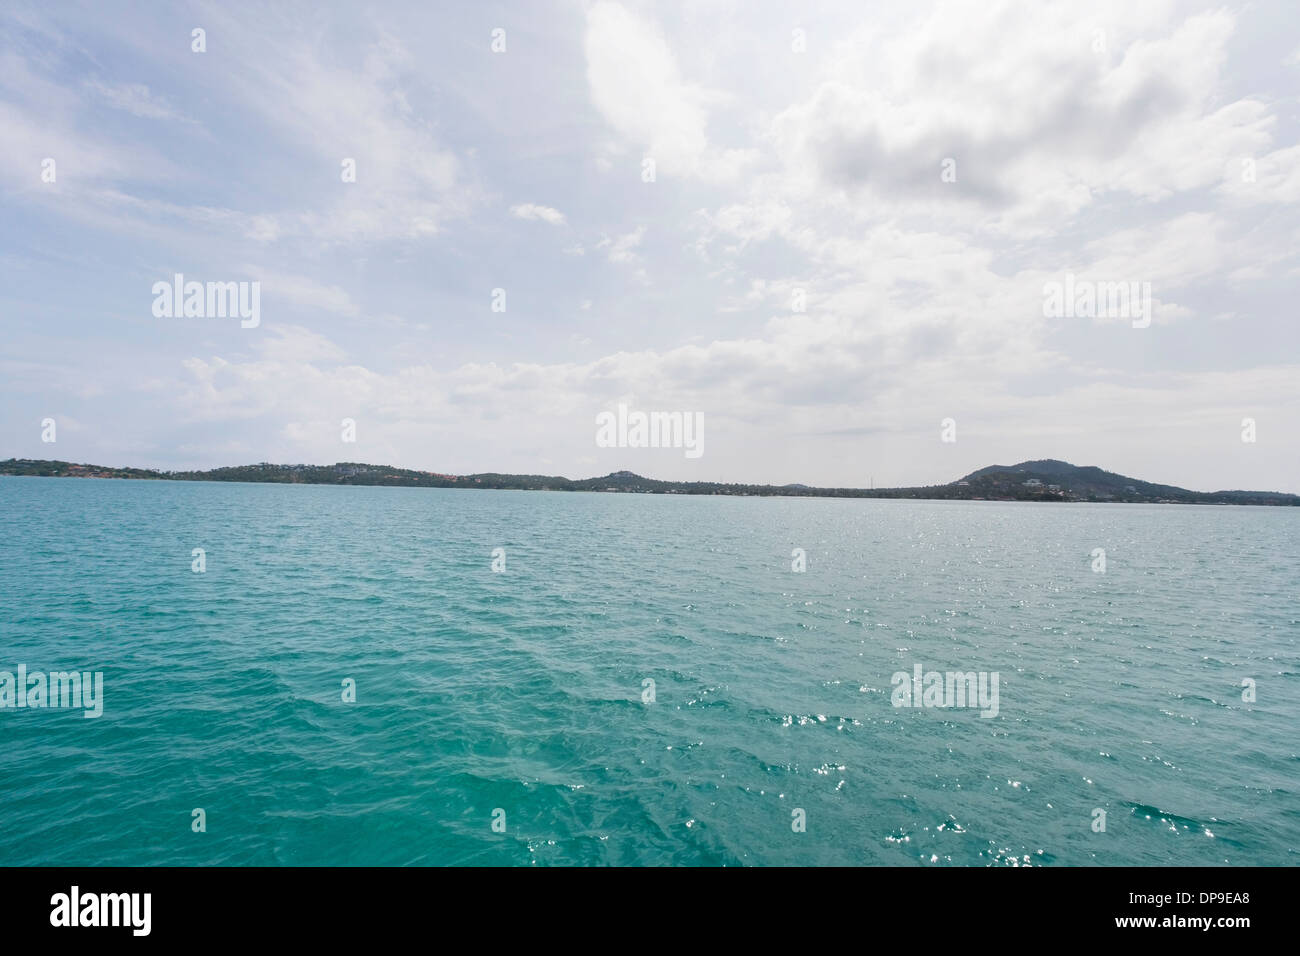 Tropical blue sea with island in background  Koh Samui  Thailand Stock Photo